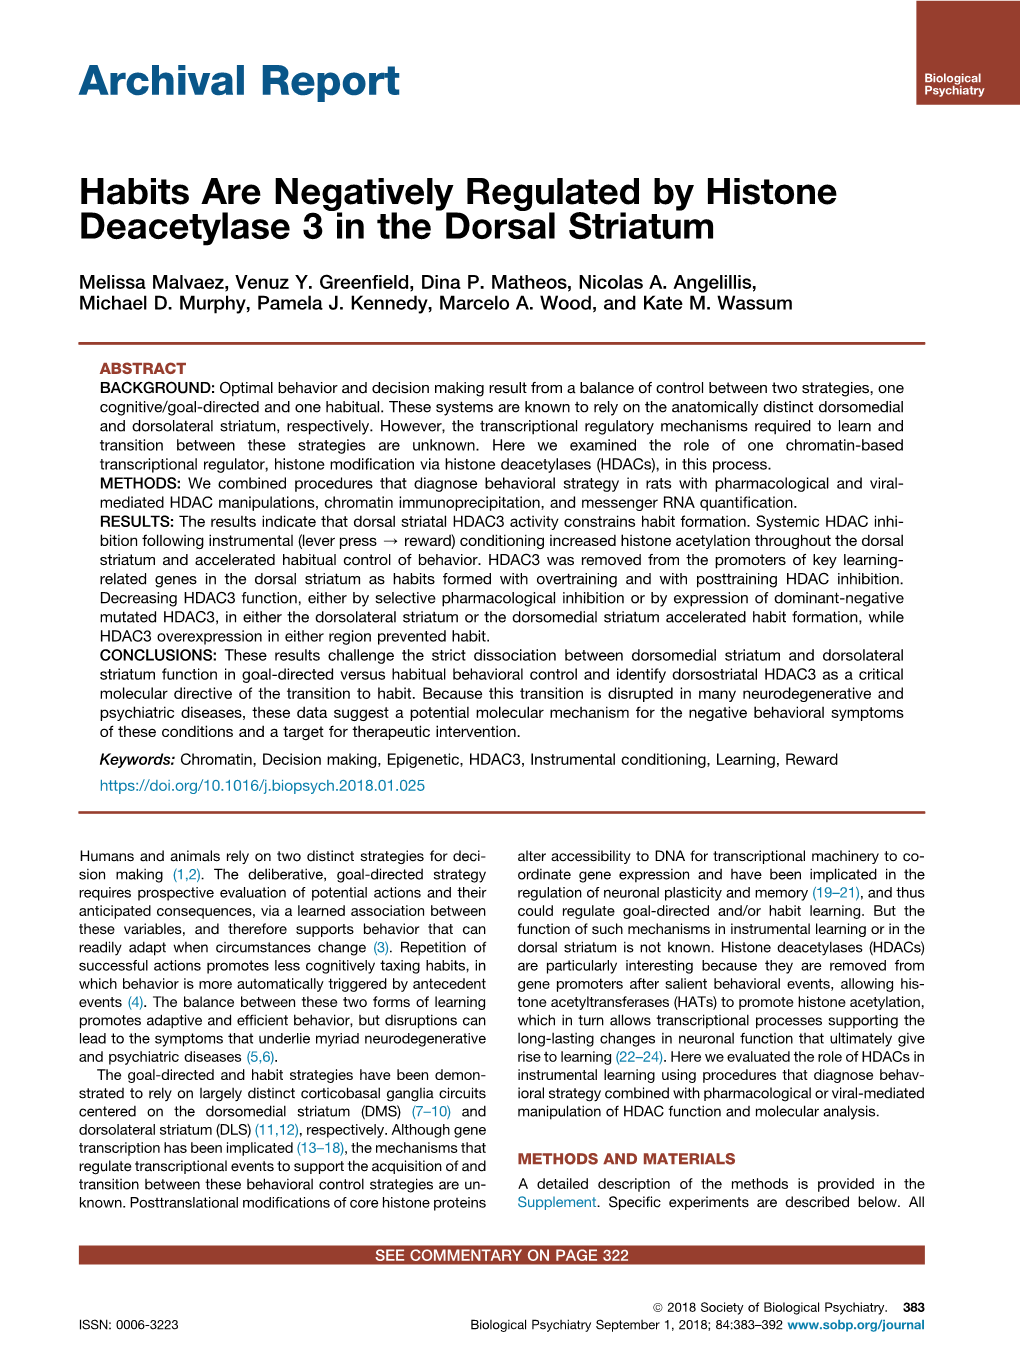 Habits Are Negatively Regulated by Histone Deacetylase 3 in the Dorsal Striatum